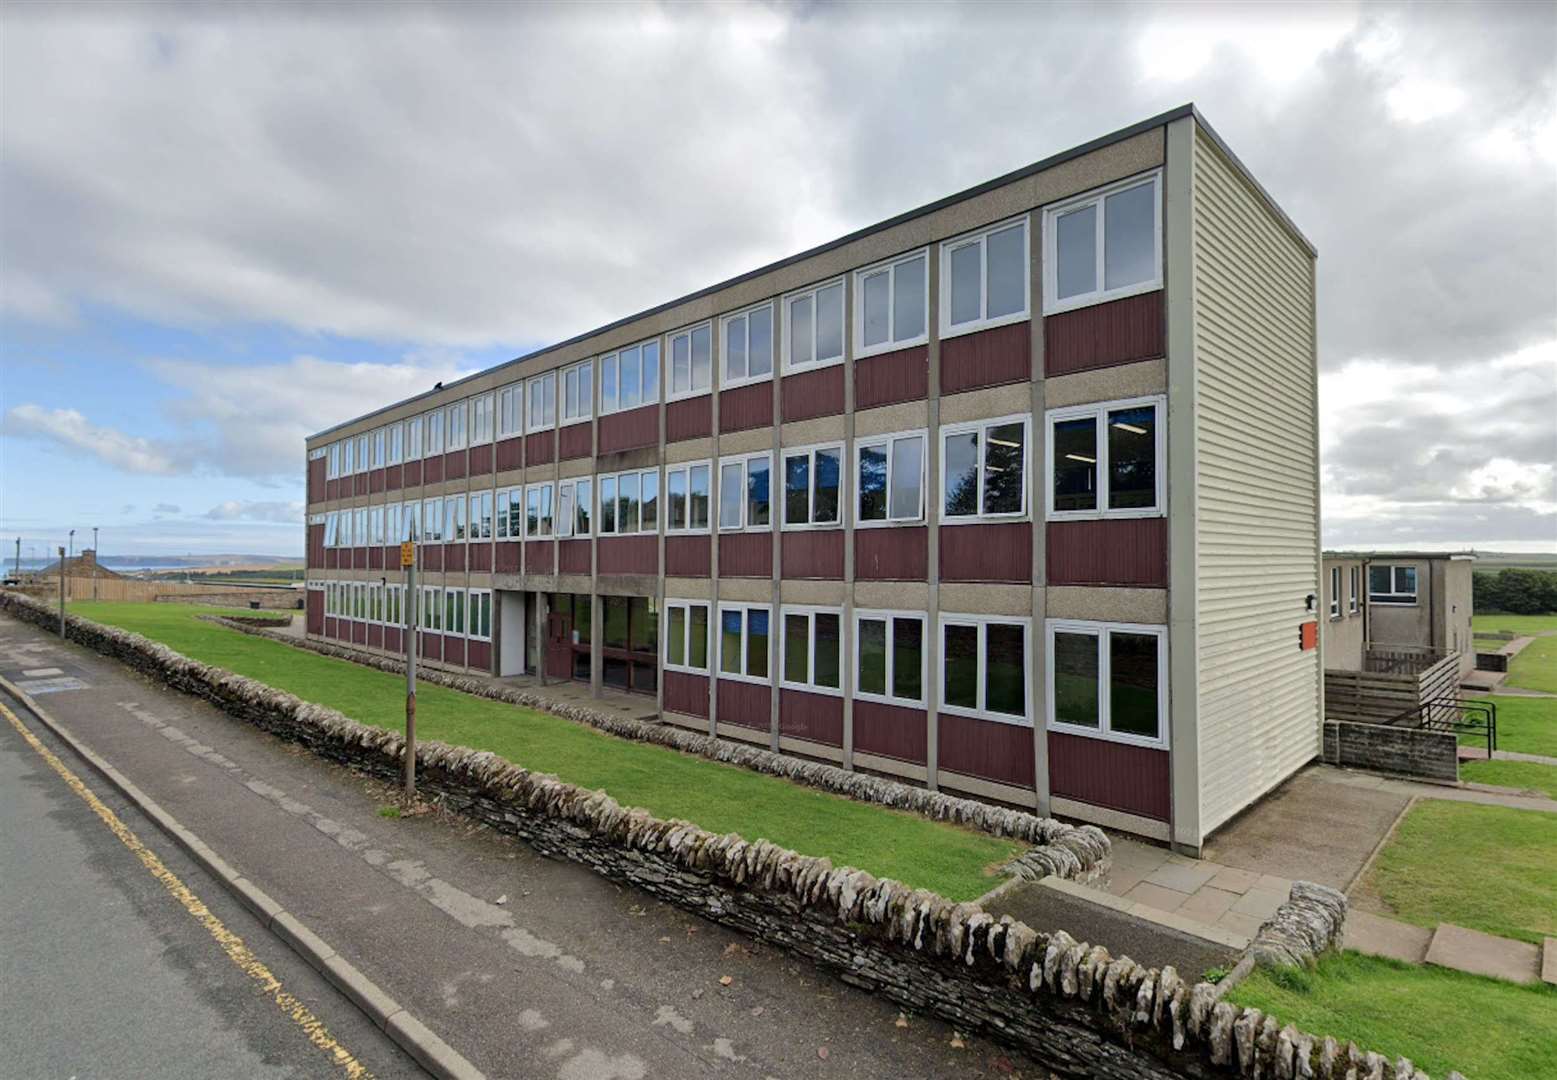 A decision will be made about the future of block "A" at Thurso High school